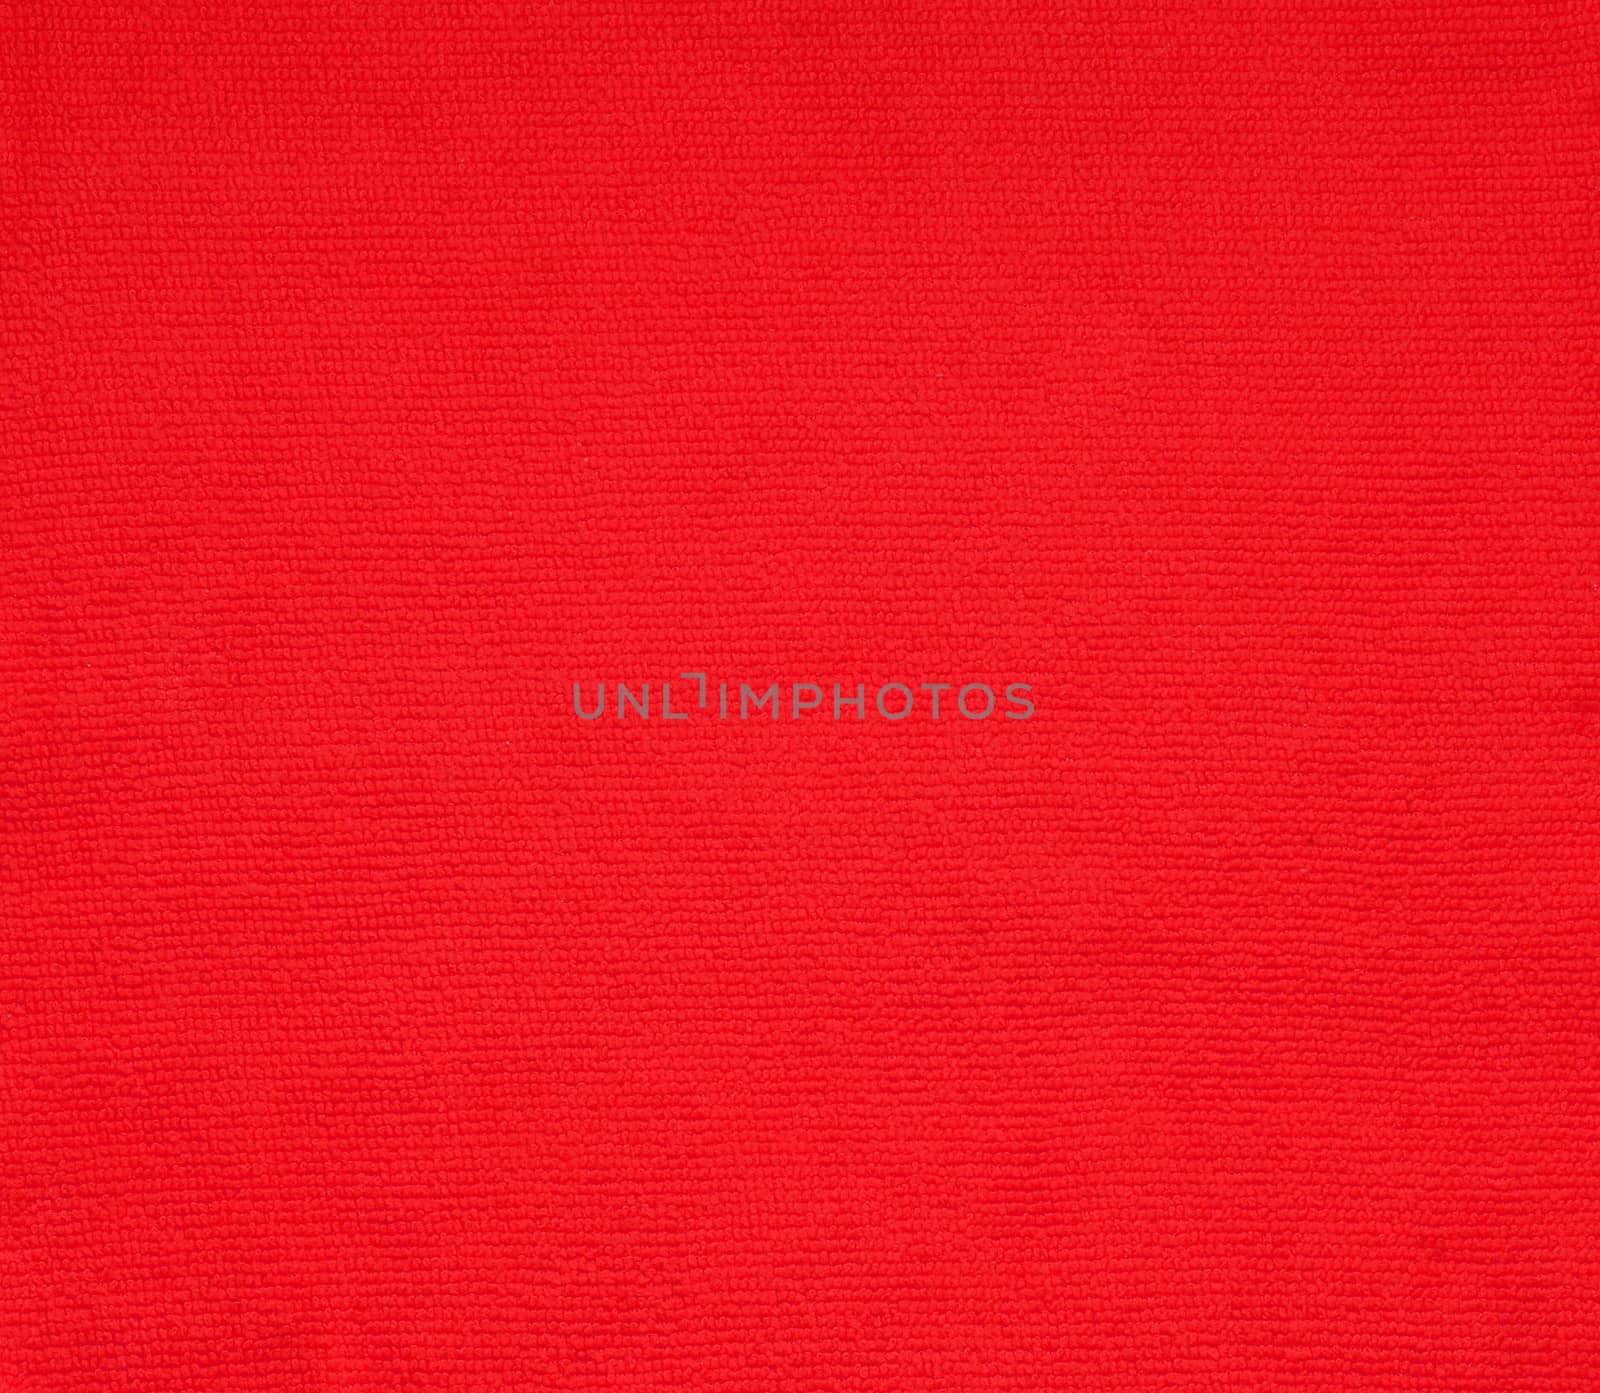 surface red fabric texture for background